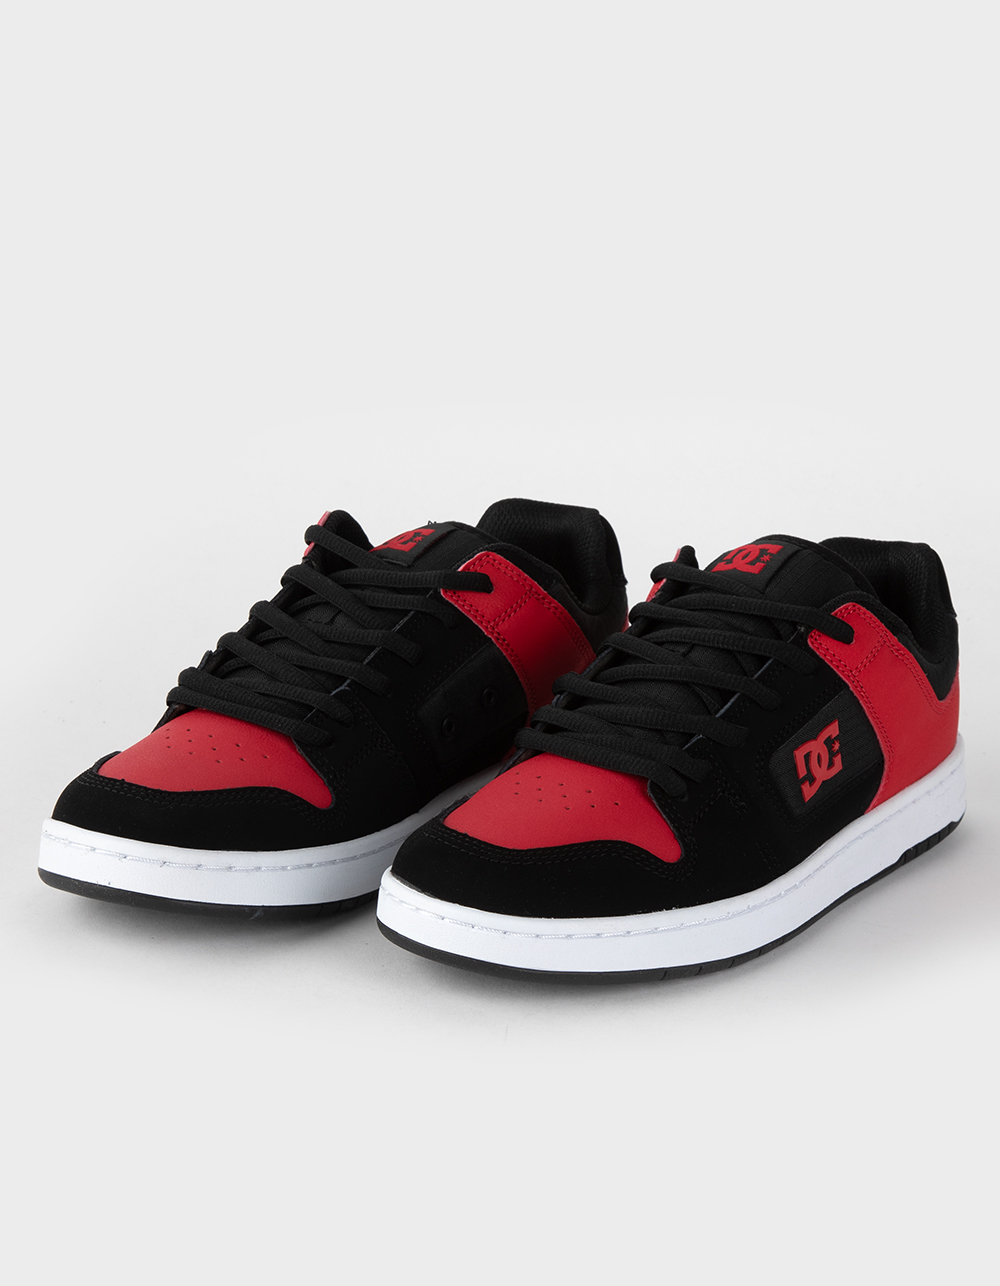 DC SHOES Shoes - BLK/RED Tillys